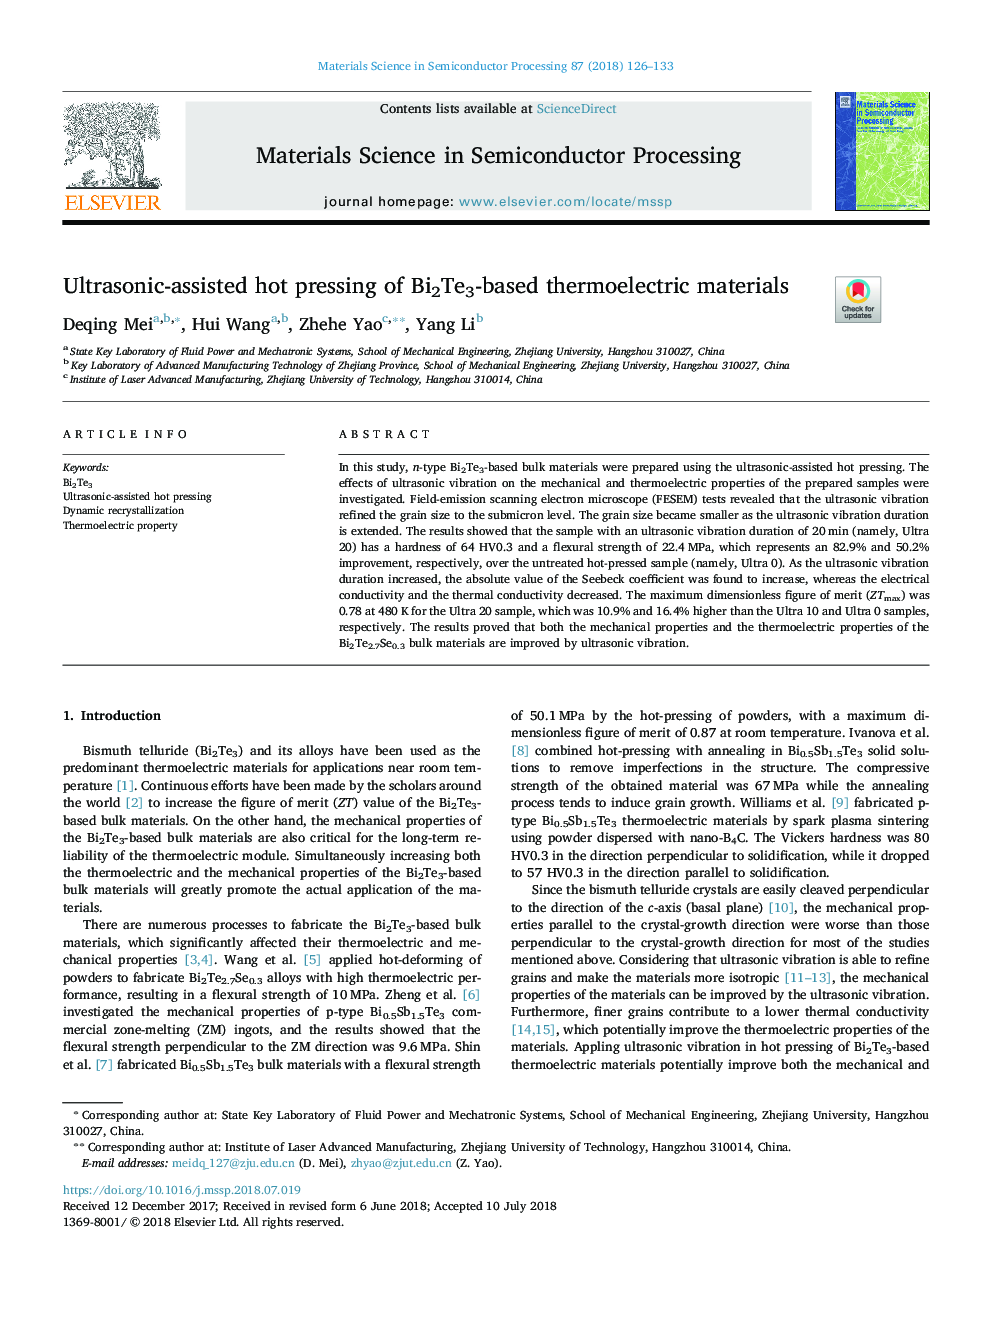 Ultrasonic-assisted hot pressing of Bi2Te3-based thermoelectric materials